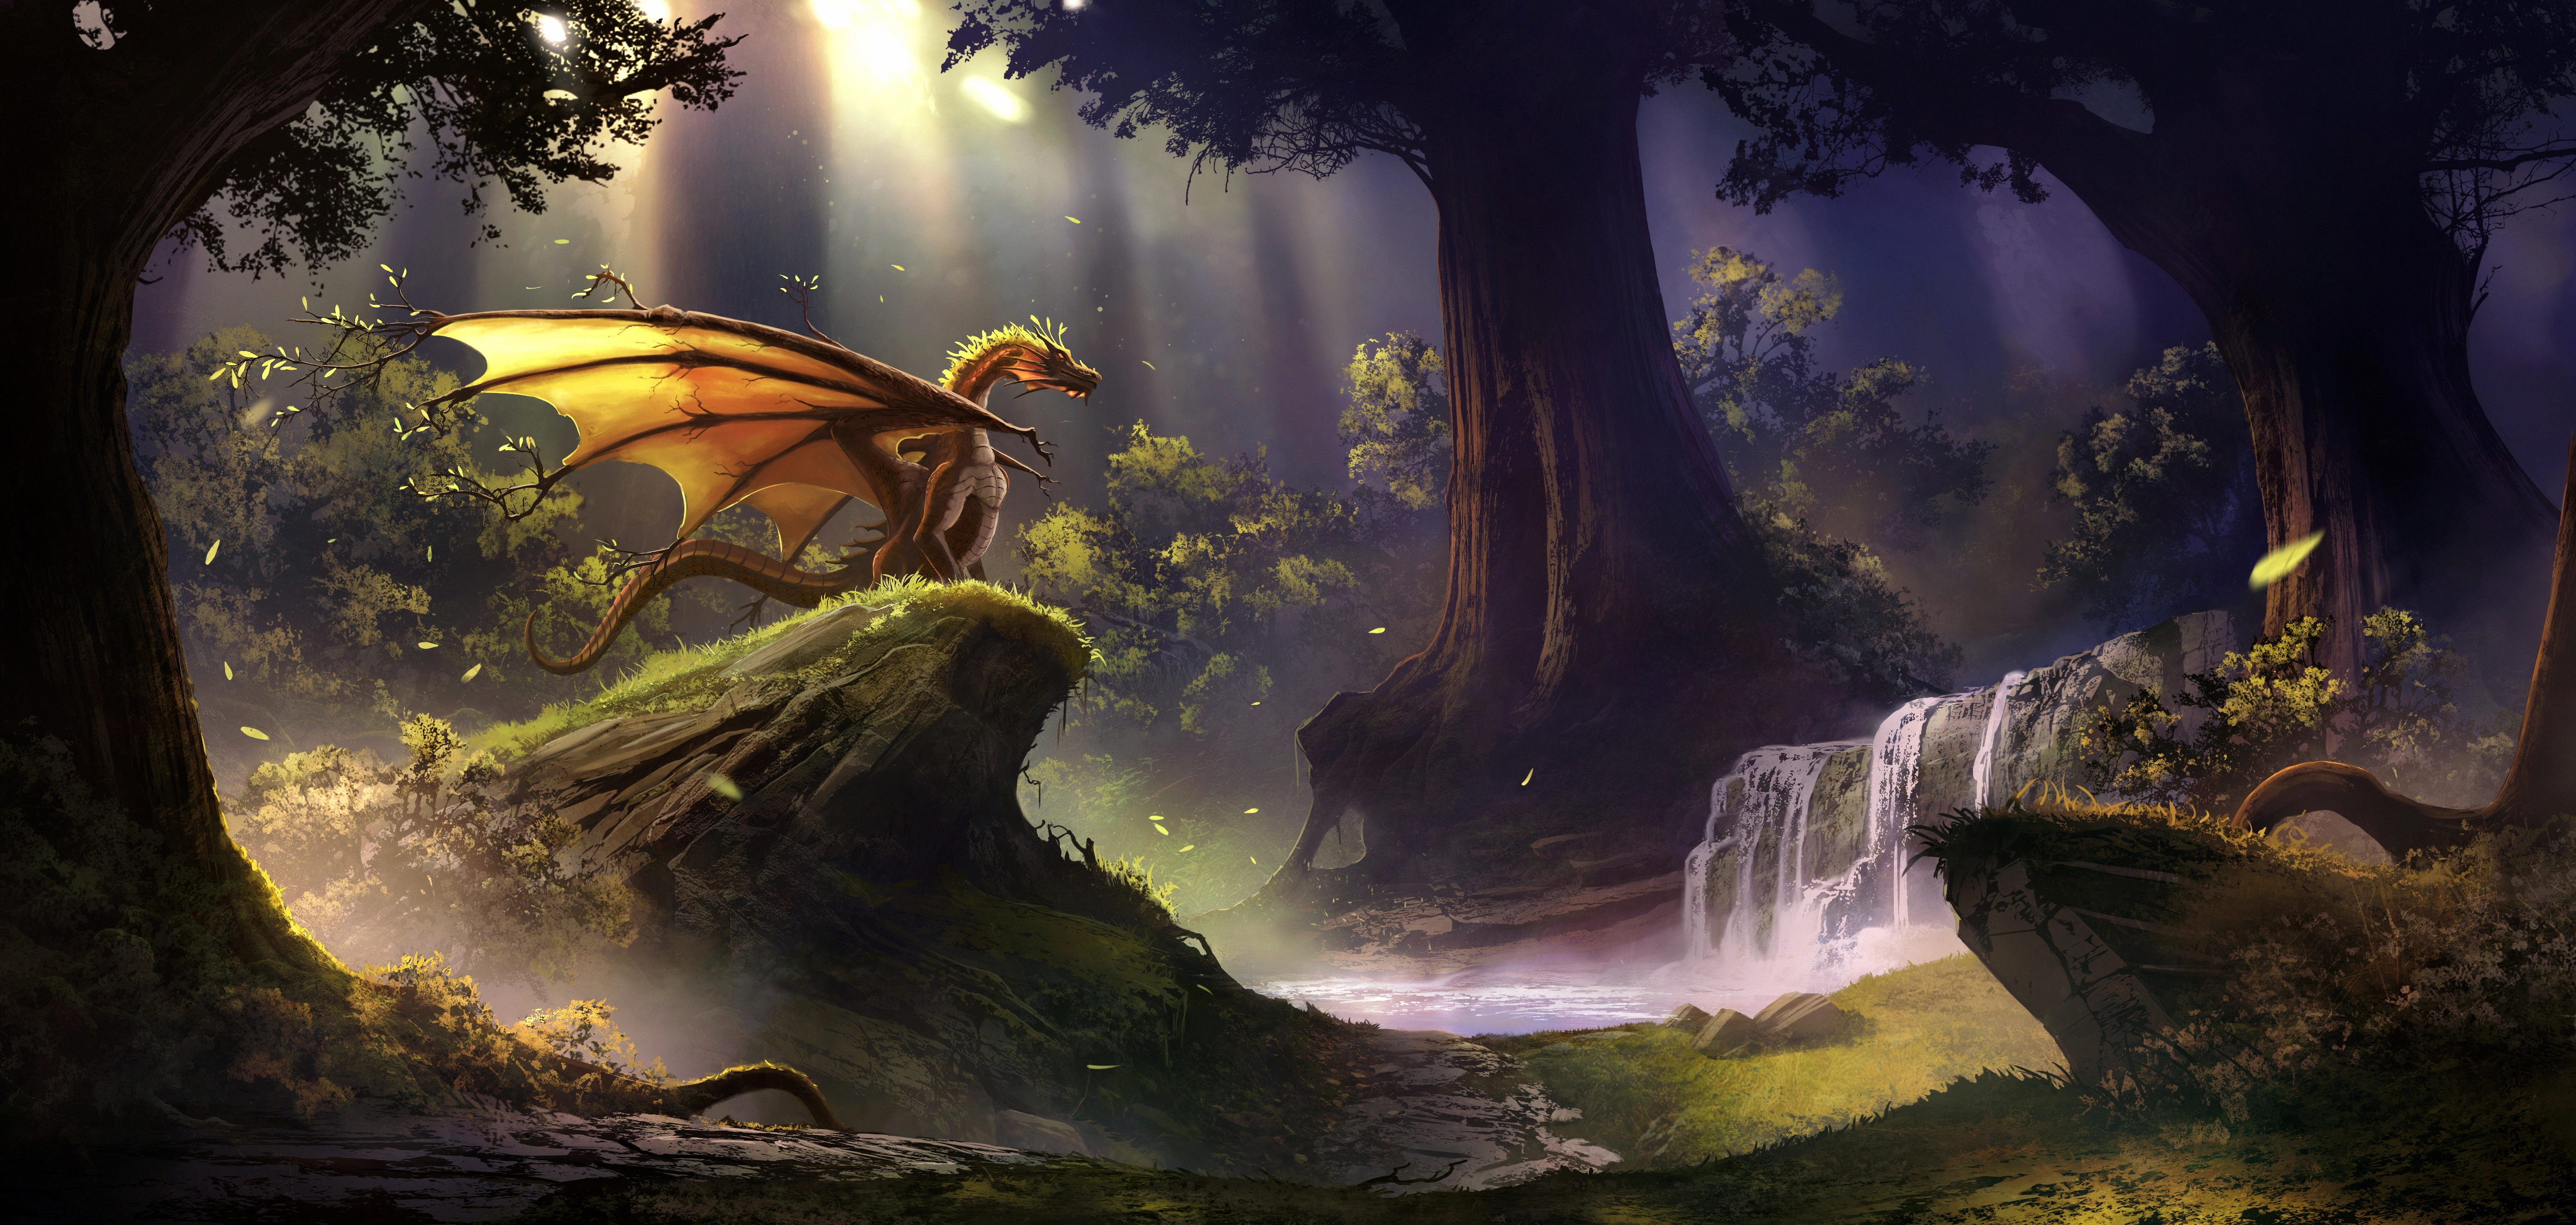 dragon in magical forest pk.jpg